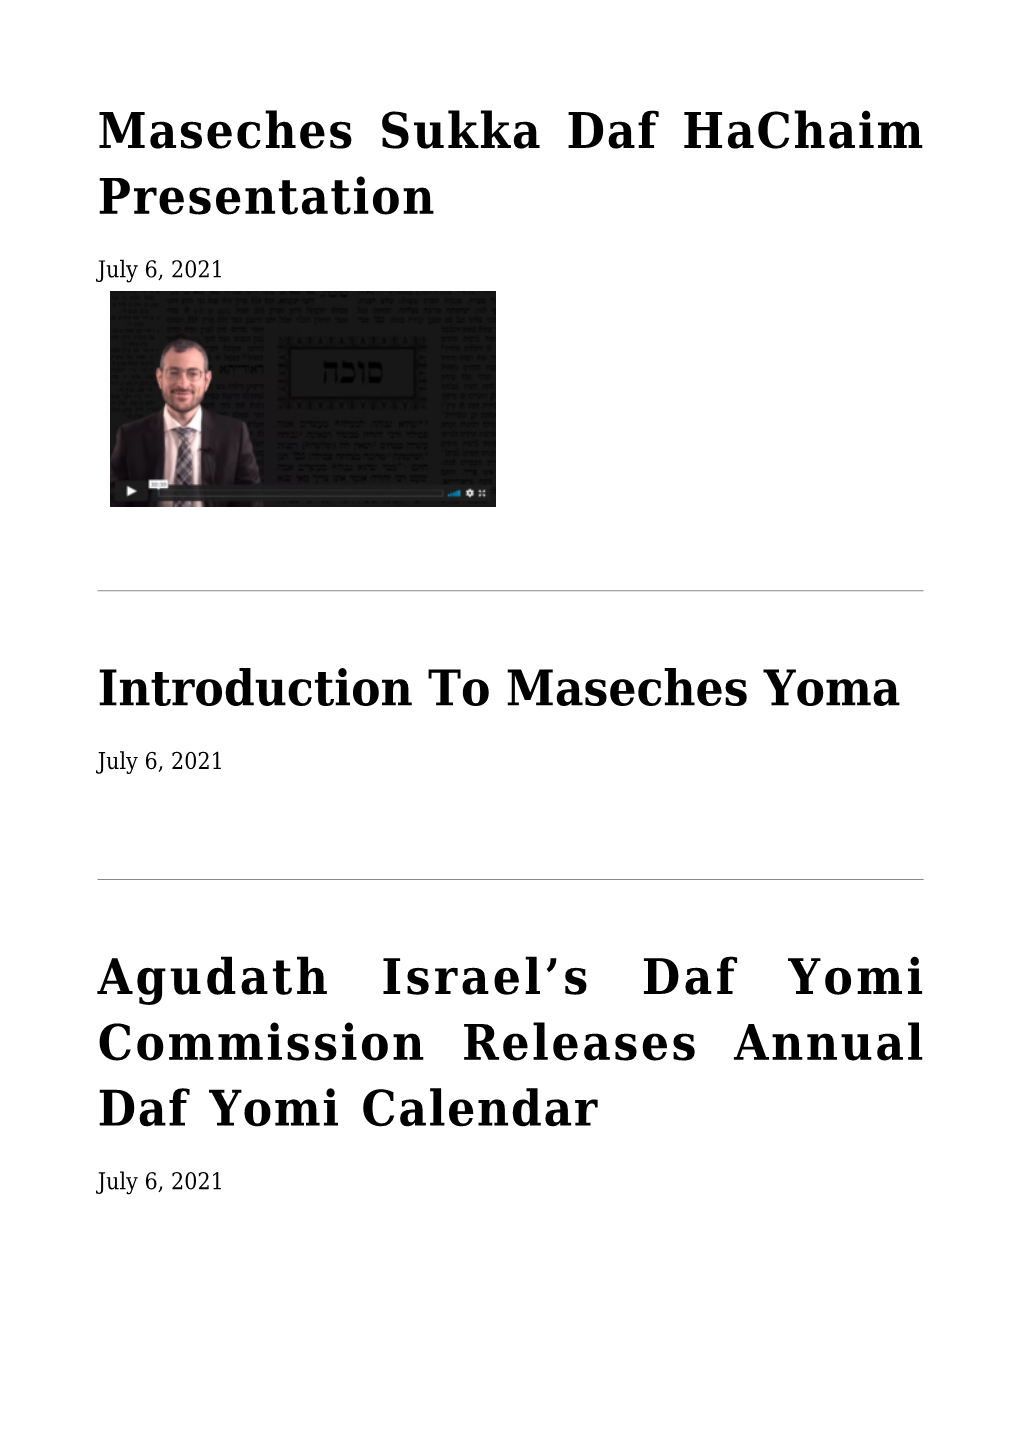 Introduction to Maseches Yoma,Agudath Israel's Daf Yomi